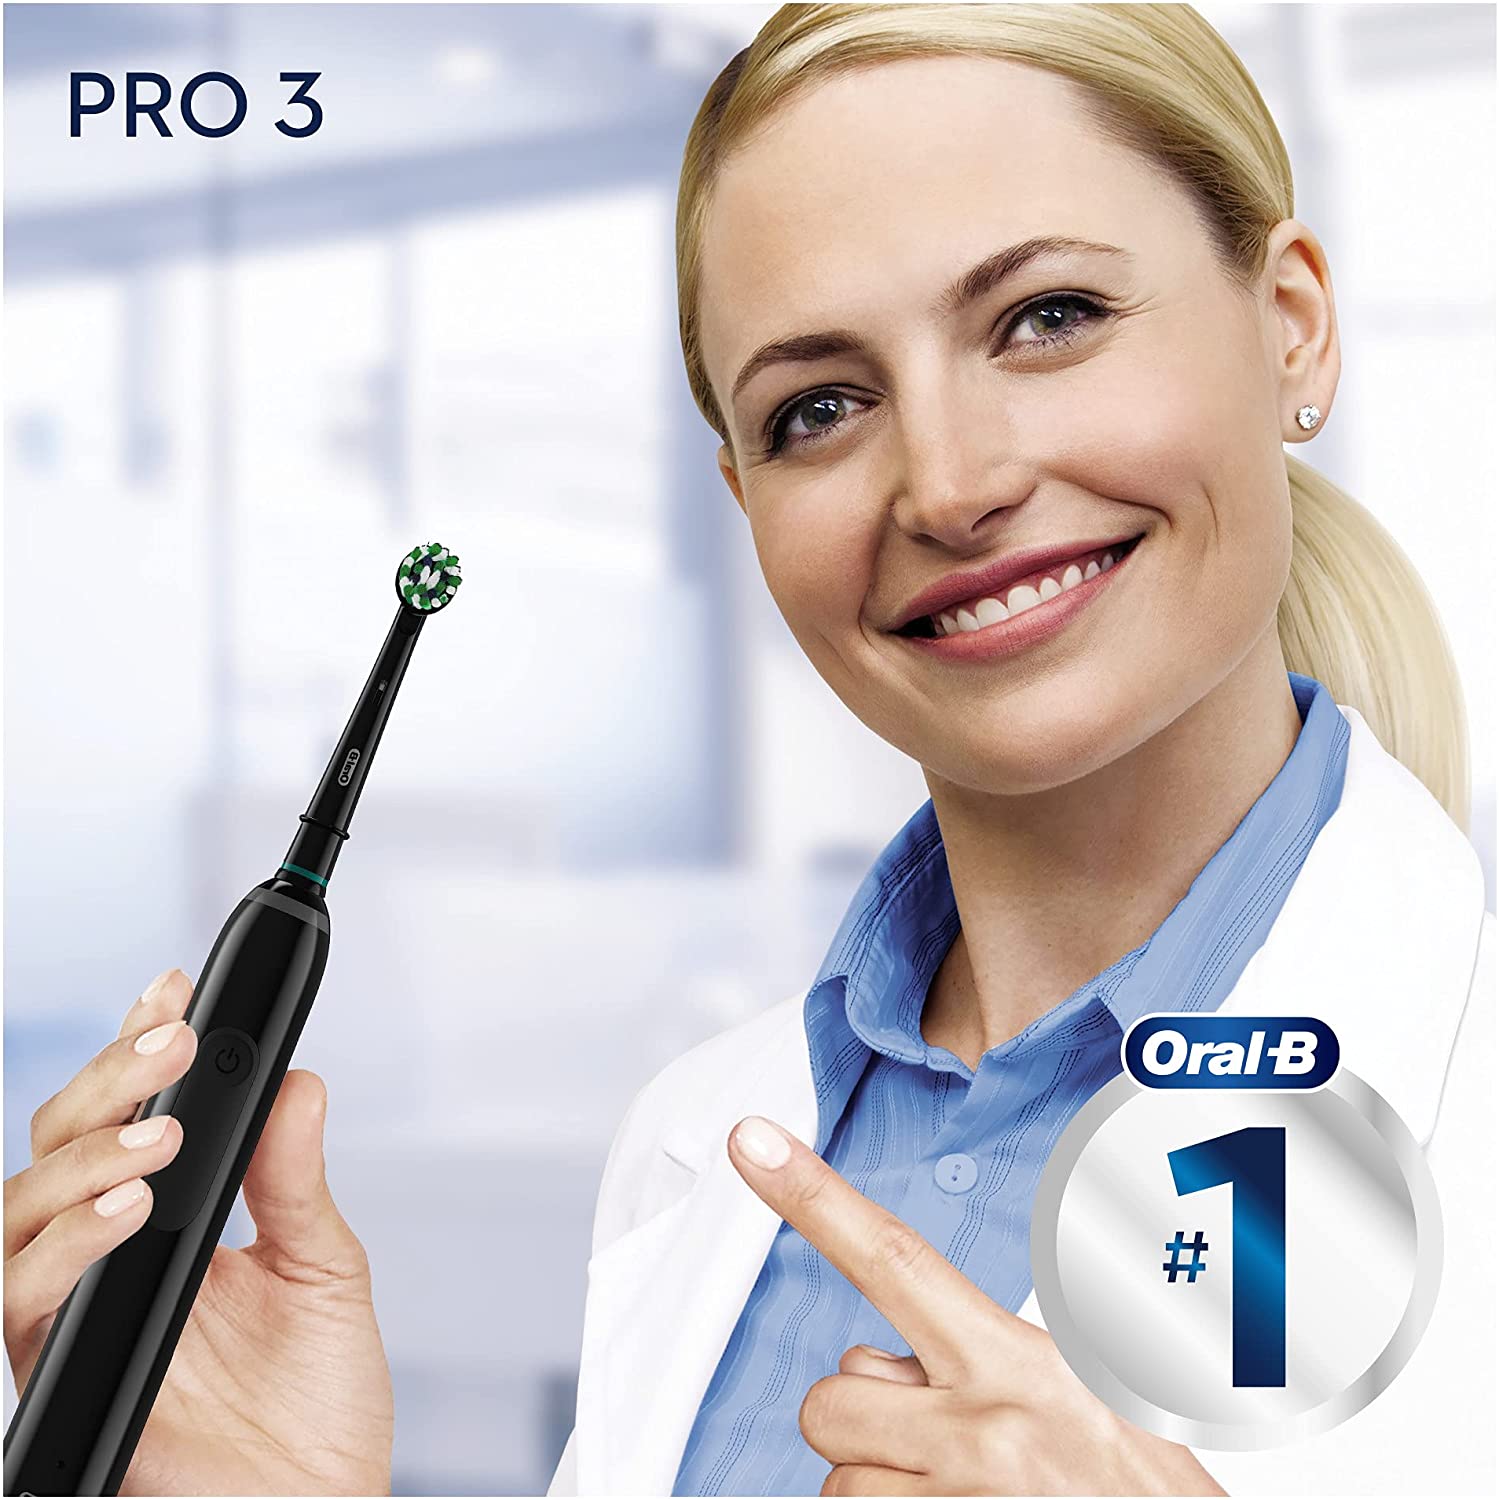 Oral-B Pro 3 - 3900 - Set of 2 Electric Toothbrushes Black, 2 Handles with Visible Pressure Sensor, 2 Toothbrush Heads - Healthxpress.ie